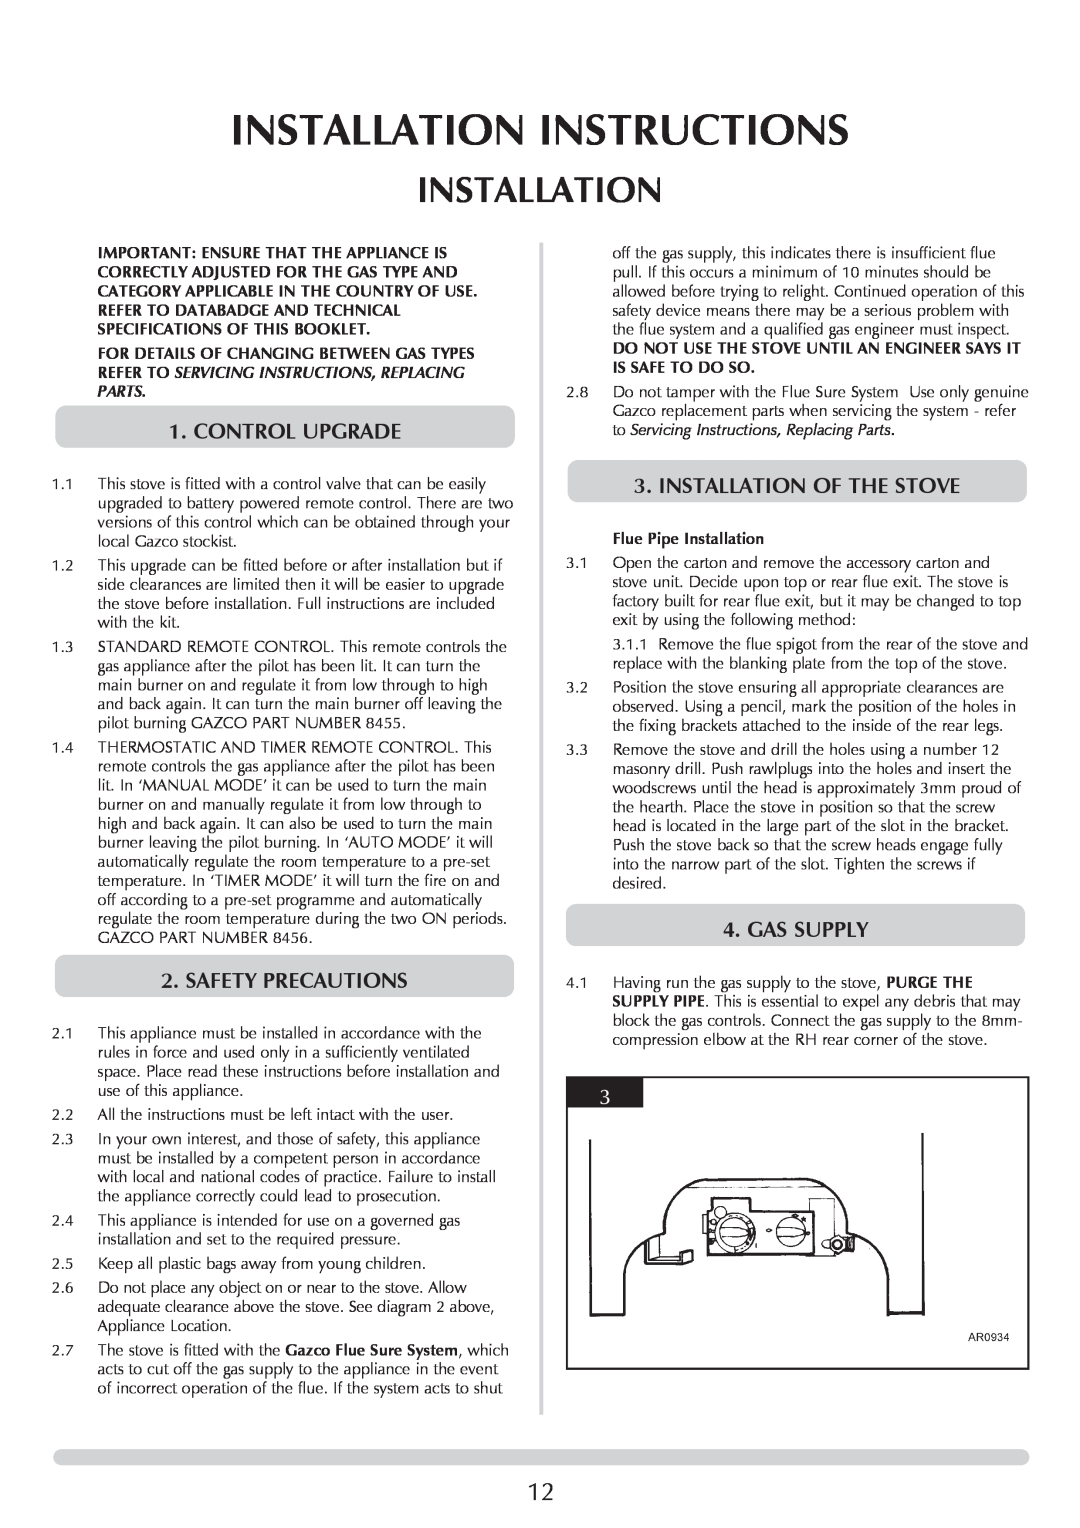 Stovax 8543-P8543, 8522-P852 Installation Instructions, Control Upgrade, Safety Precautions, Installation Of The Stove 